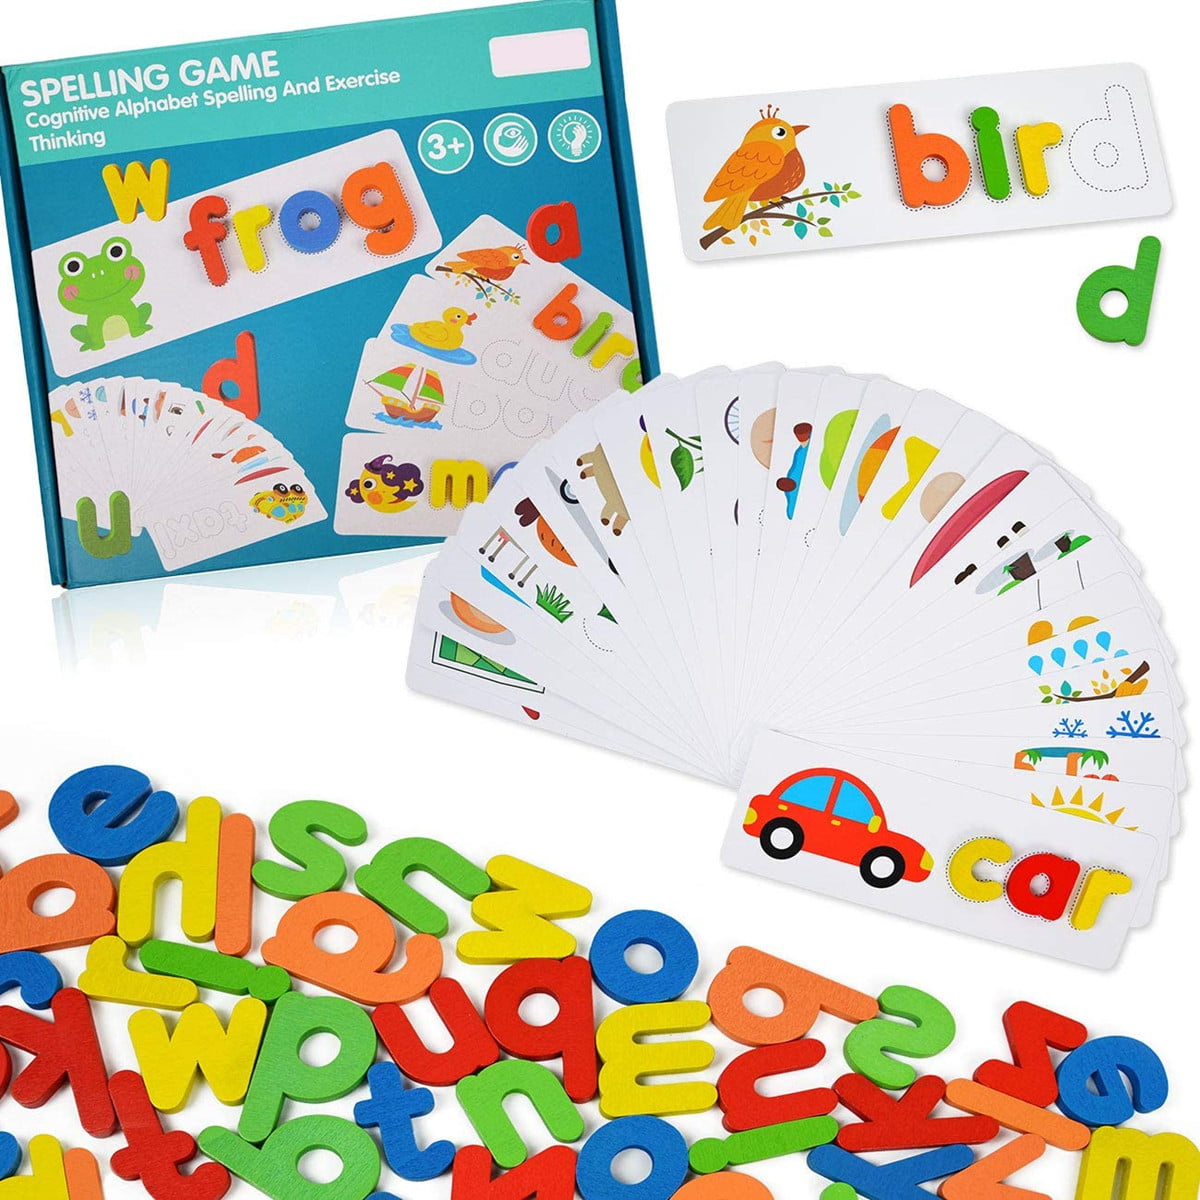 Spelling English Alphabet 26 Letters Recognition Kids Educational puzzle Game 